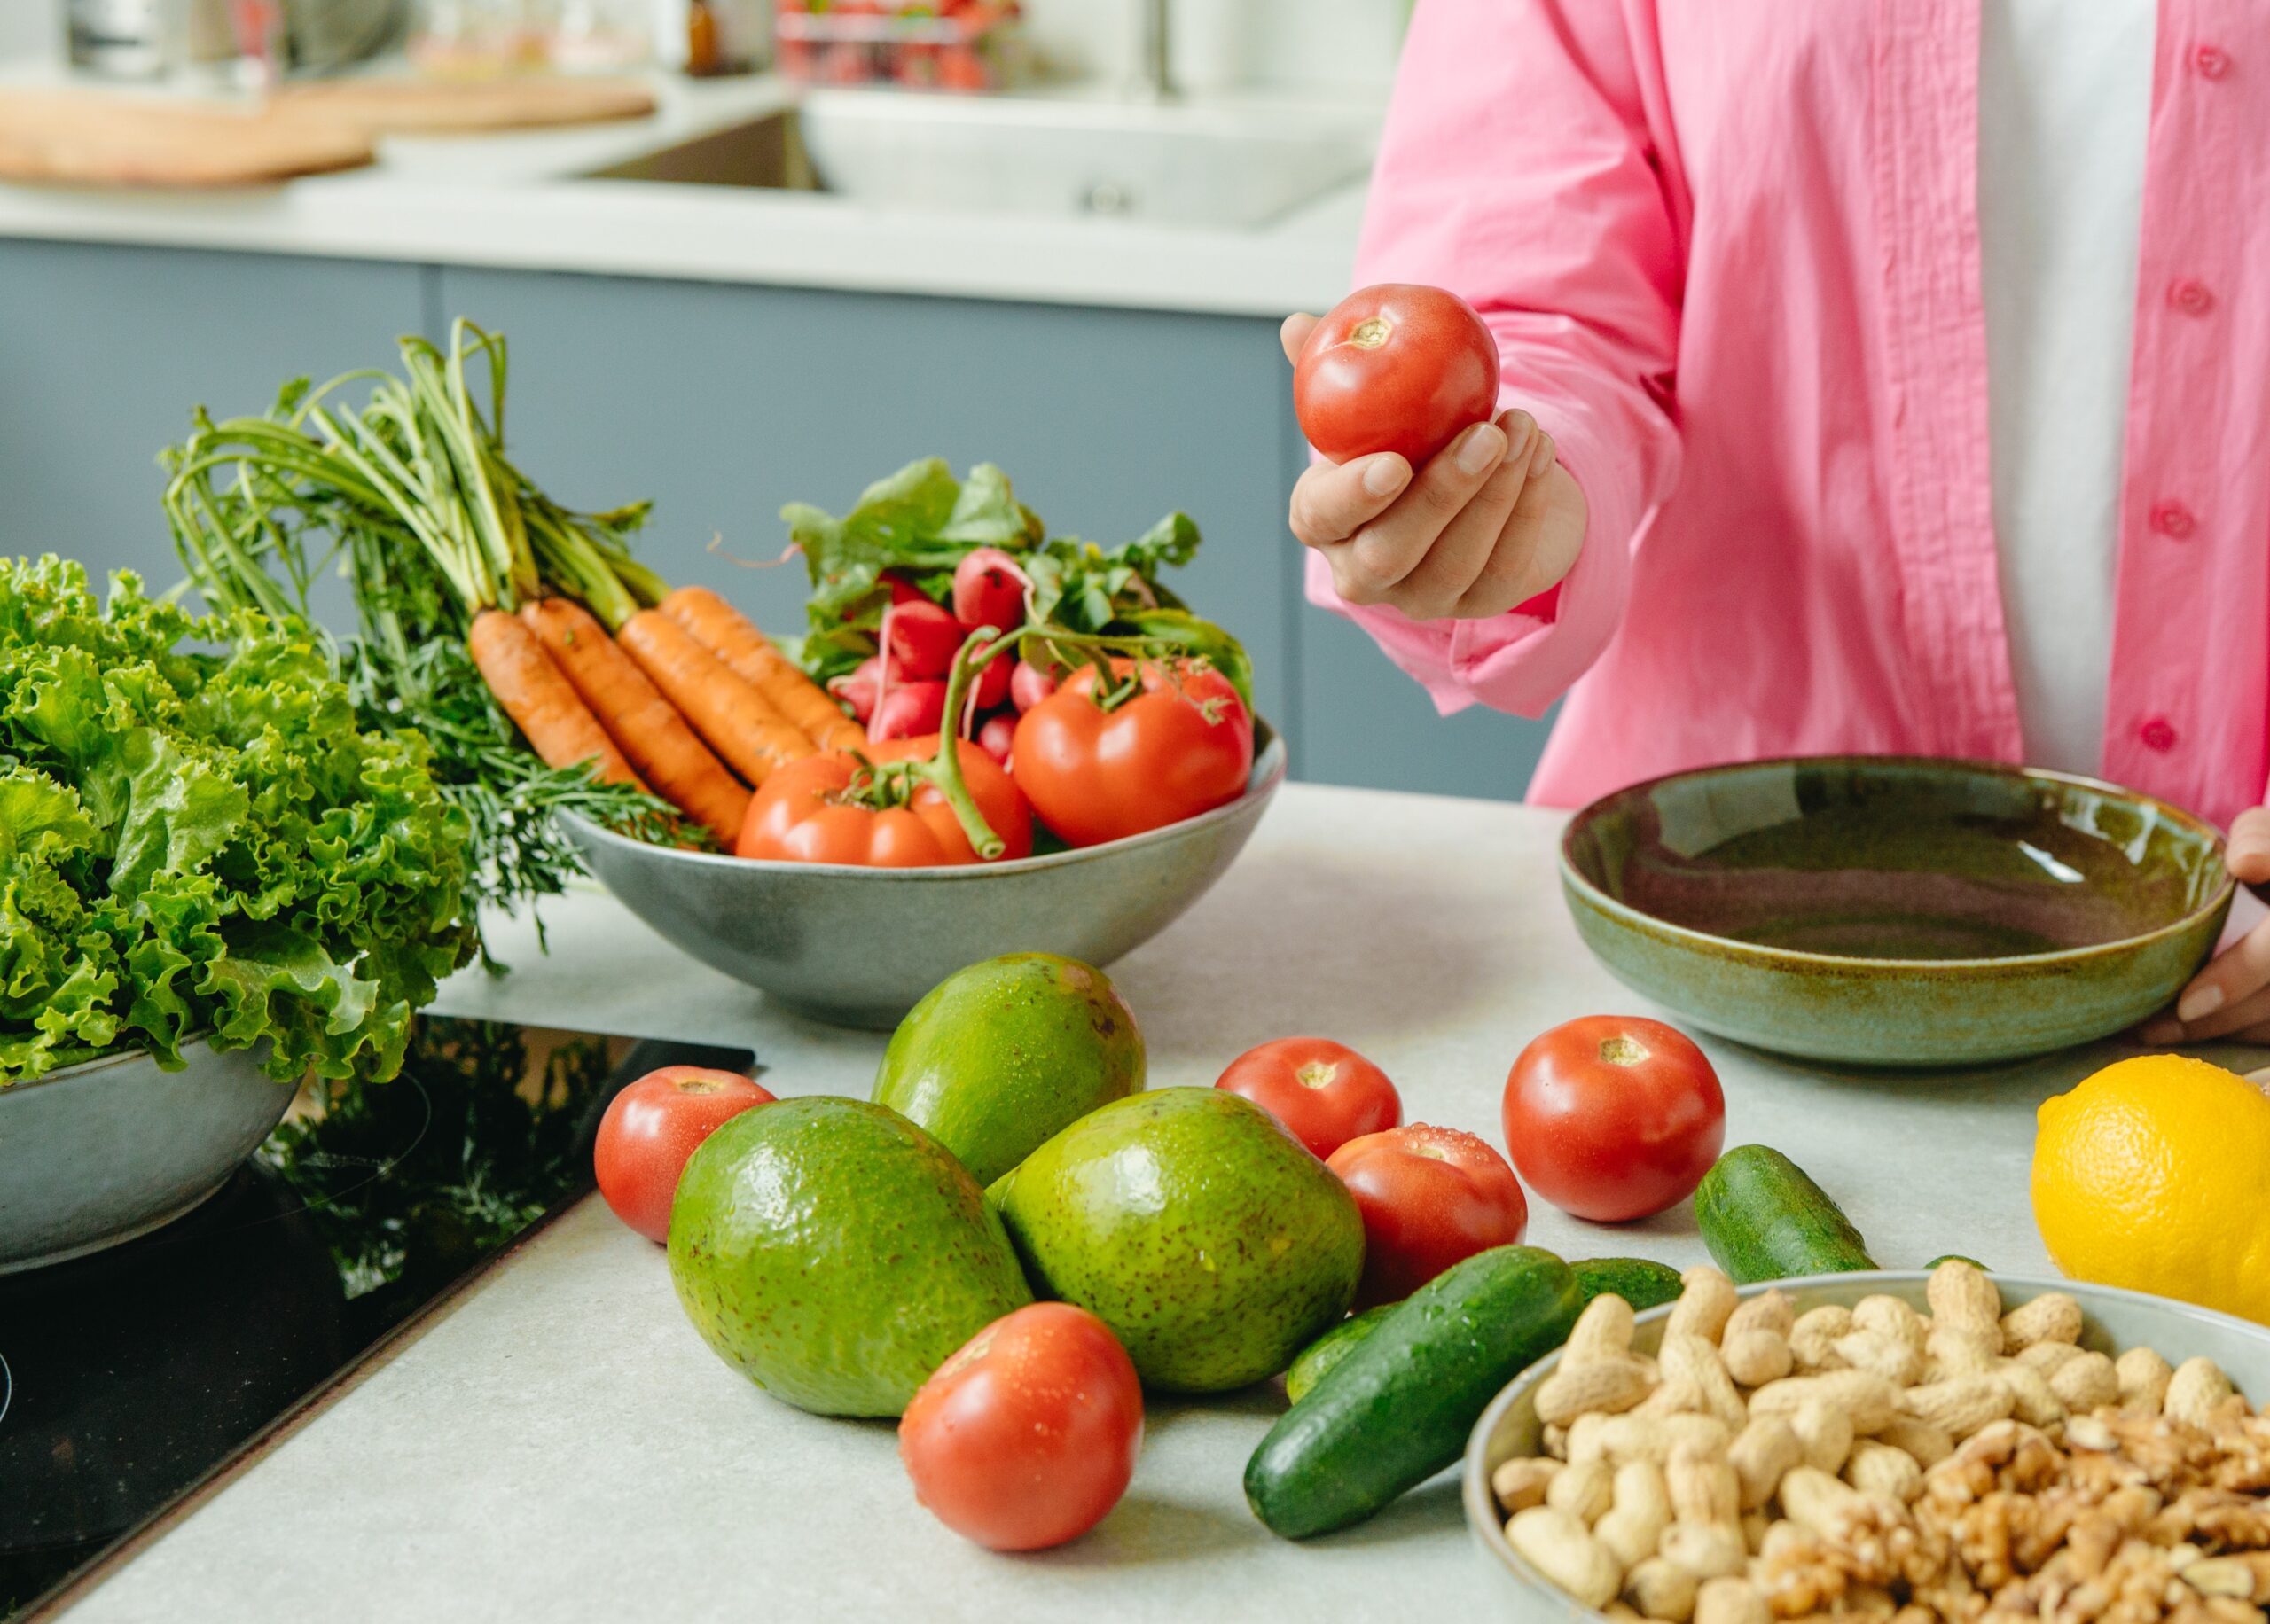 Person in Pink Dress Shirt Holding Red Tomato with a bunch of other colorful produce in the background